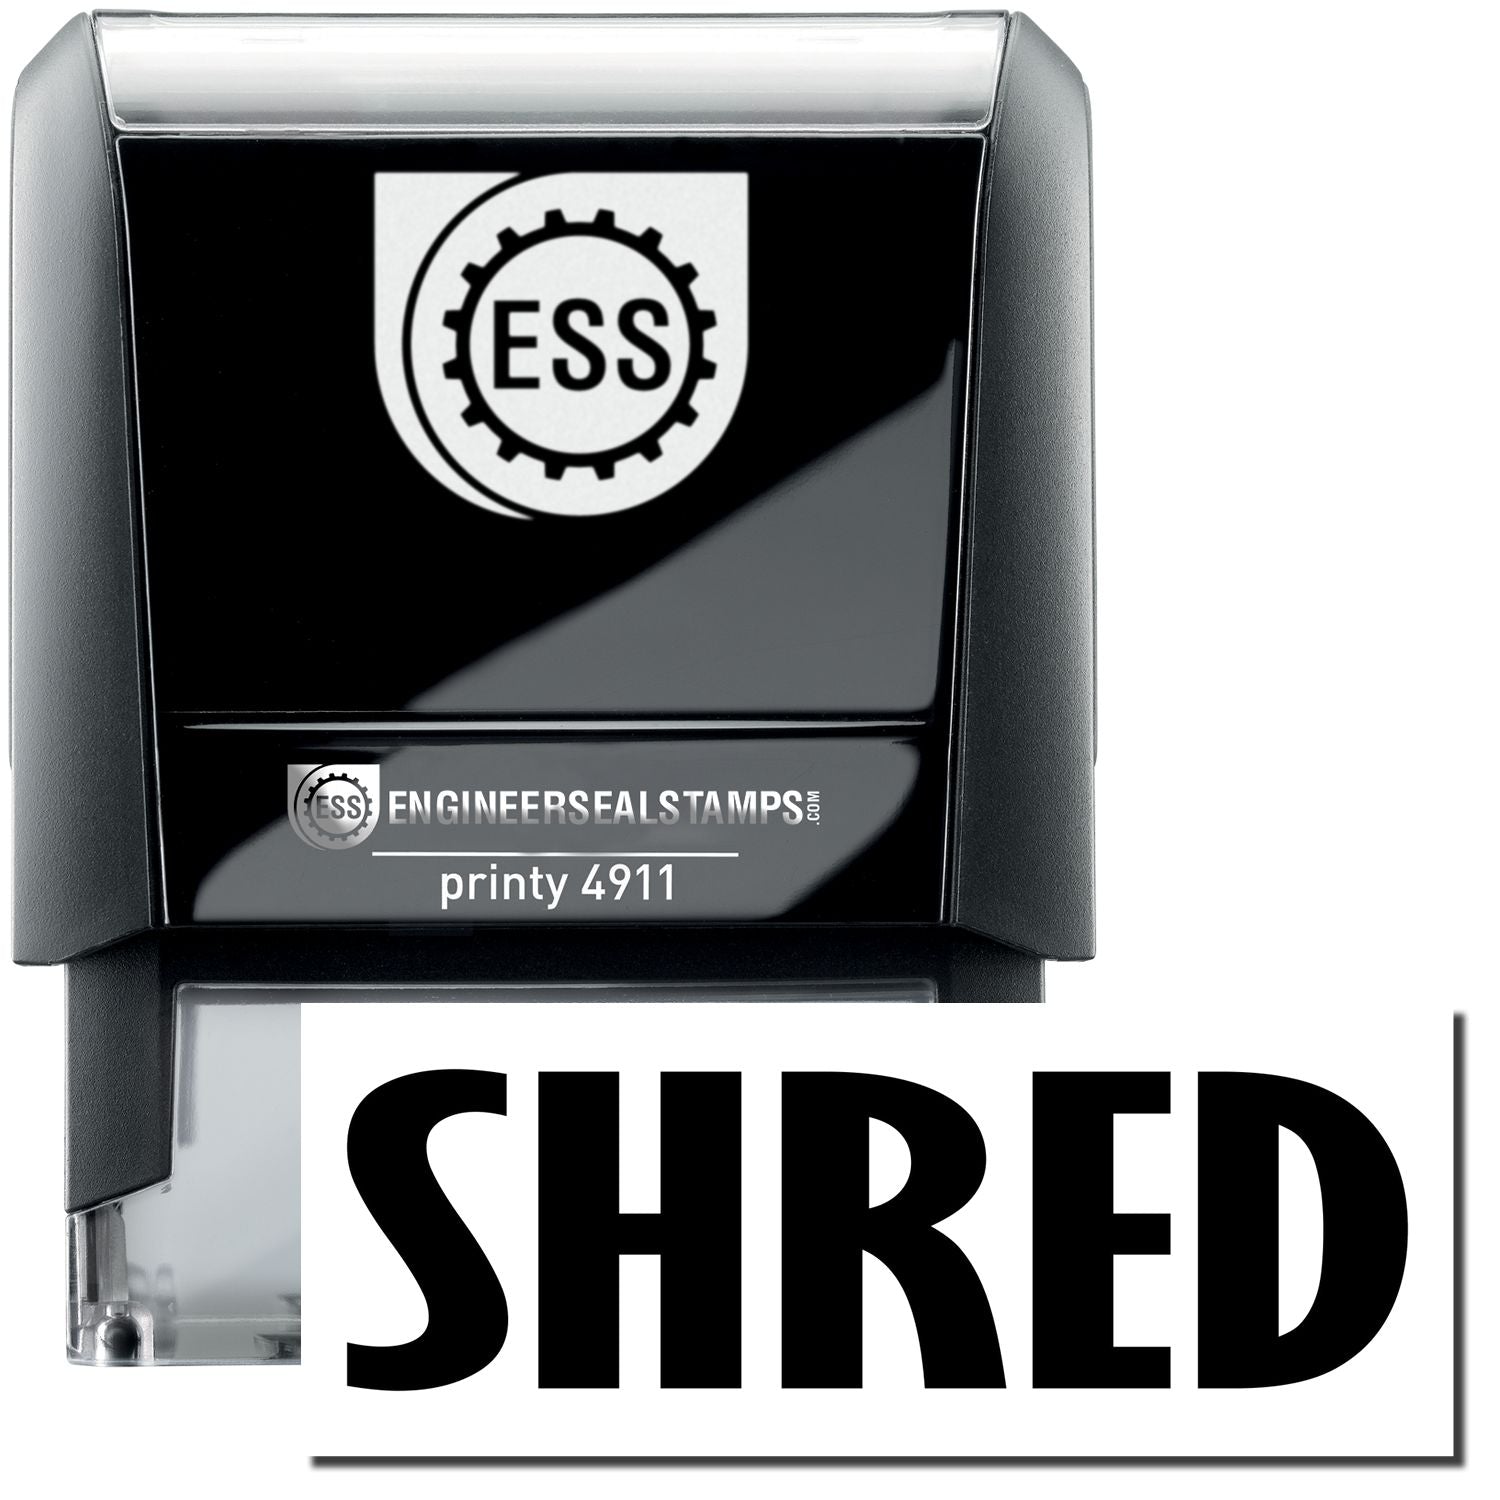 A self-inking stamp with a stamped image showing how the text "SHRED" is displayed after stamping.